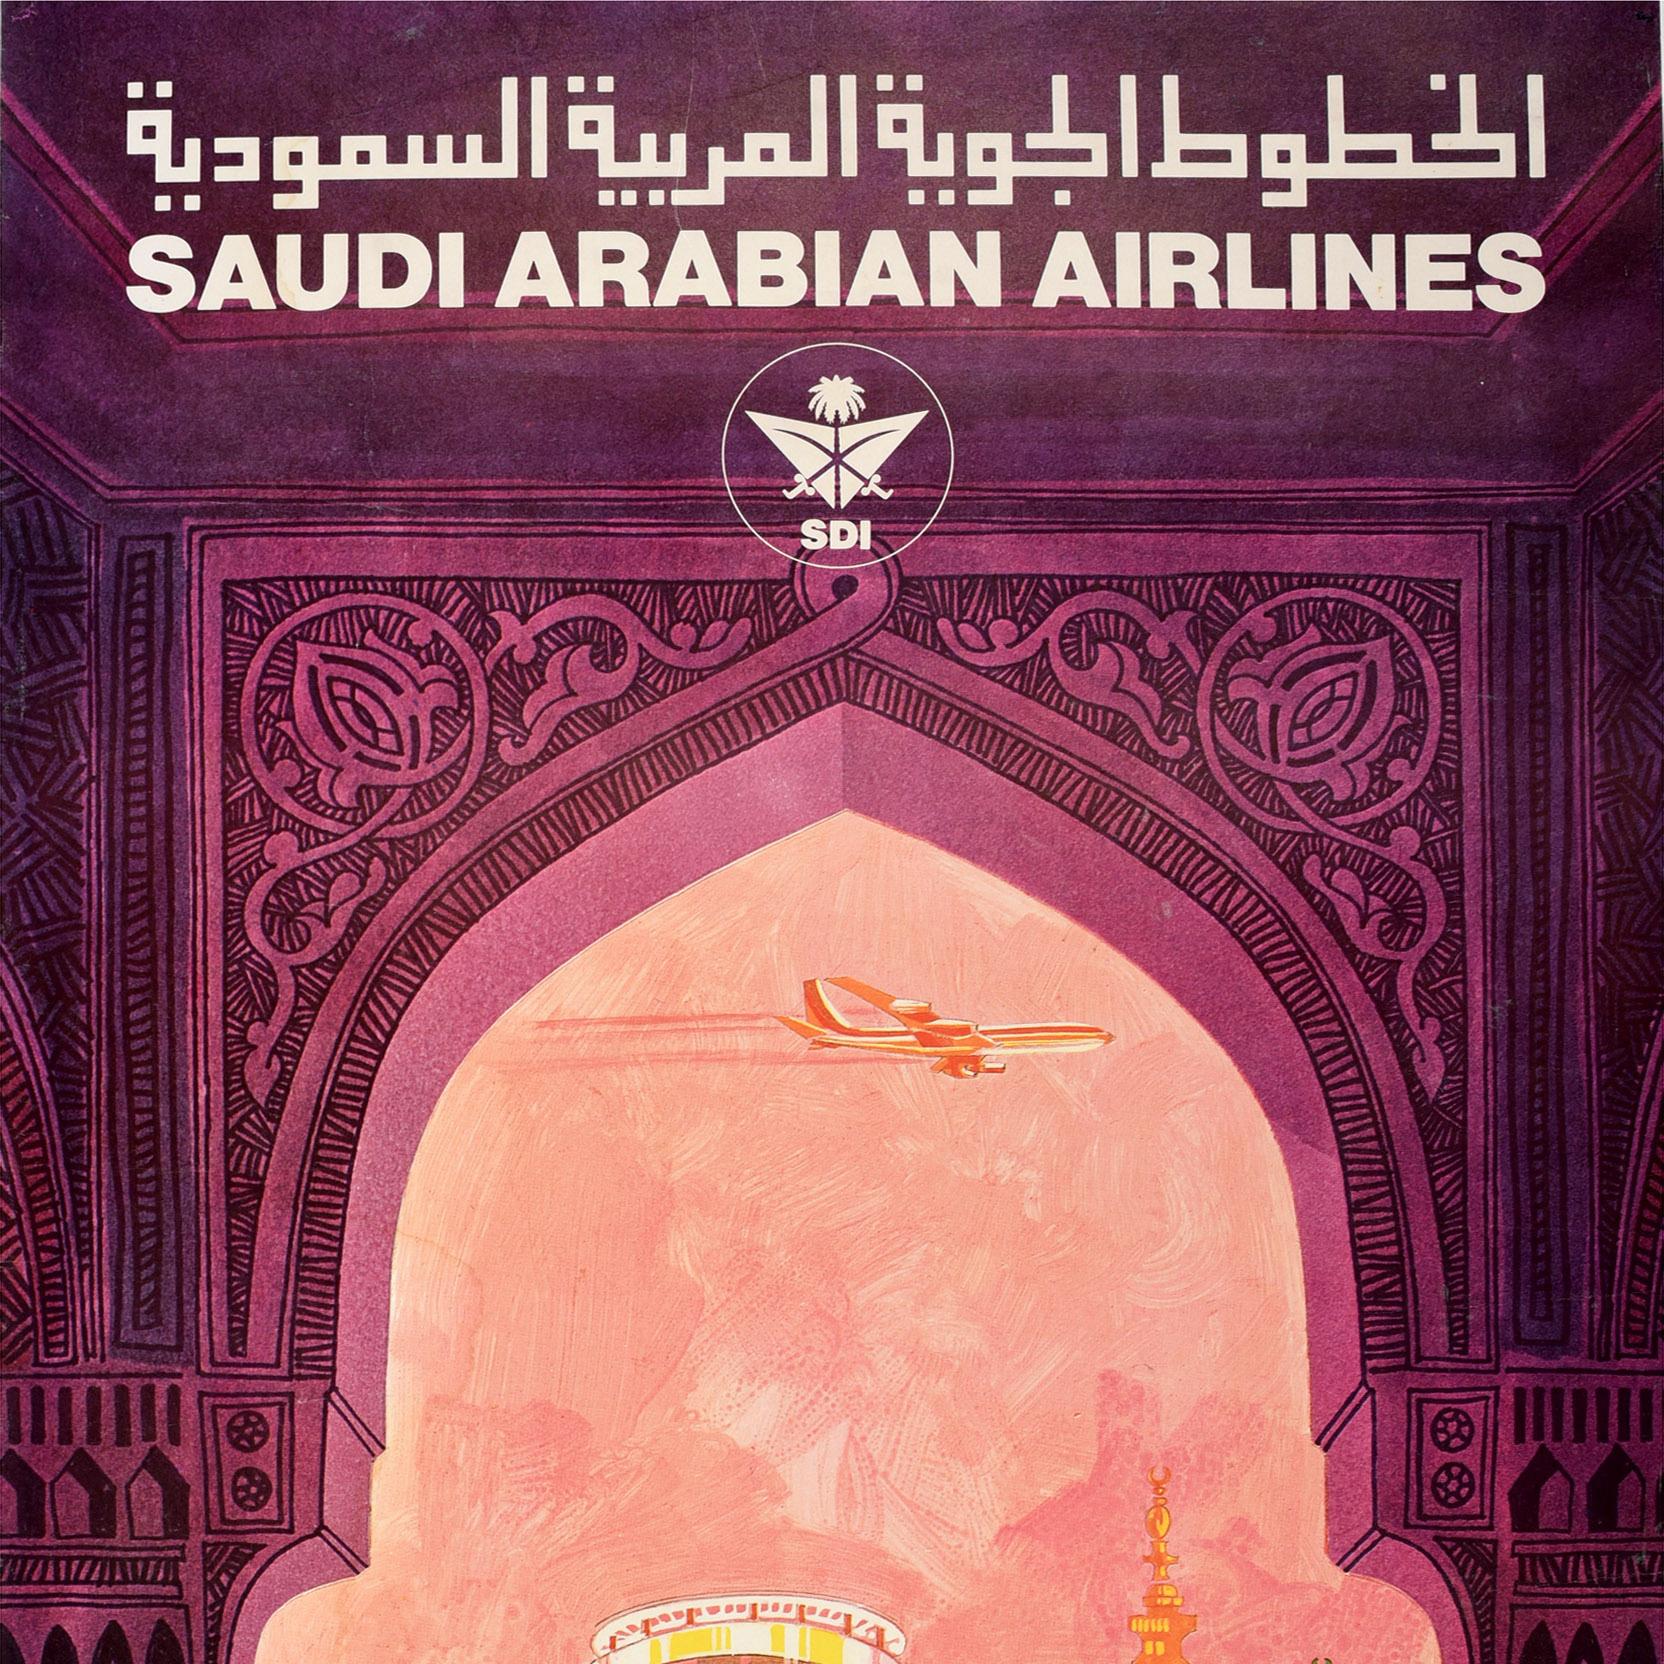 Original vintage Middle East travel poster for Saudi Arabia المملكة العربية السعودية issued by Saudi Arabian Airlines الخطوط الجوية العربية السعودية featuring a colourful city skyline on a pink shaded background with a plane flying overhead viewed